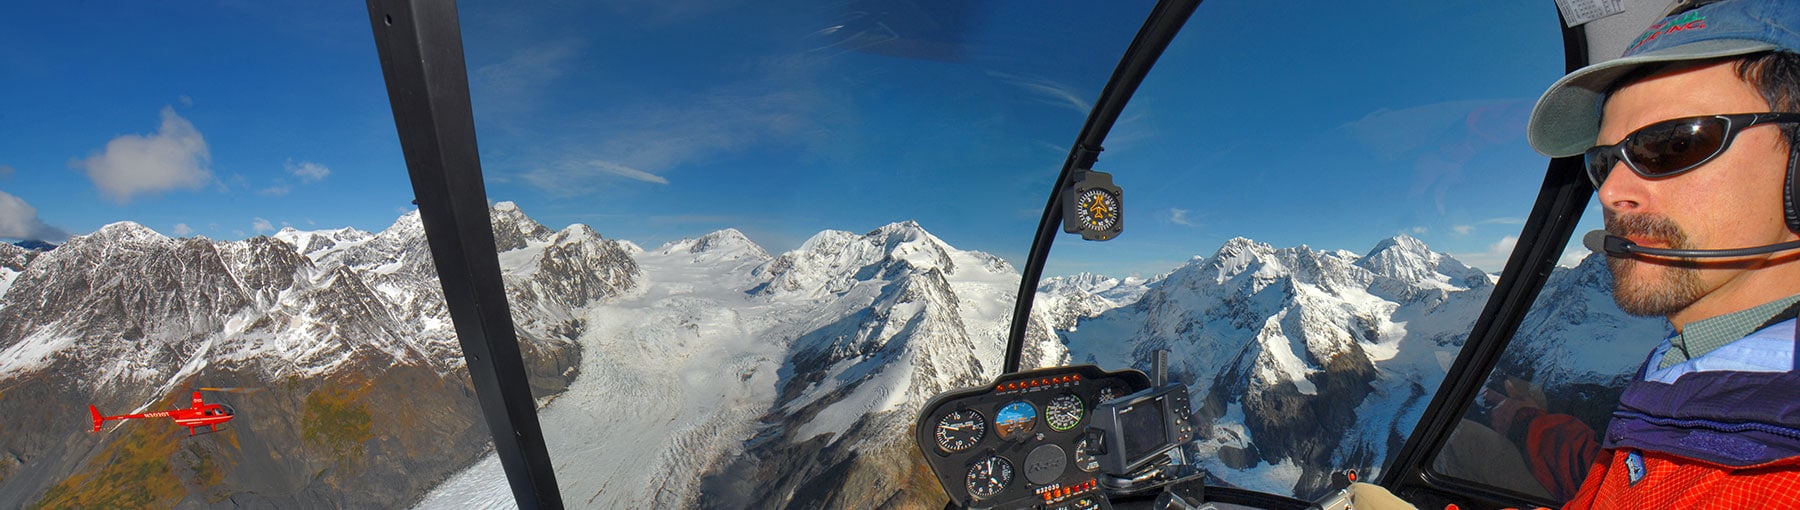 Helicopter pilot in the cockpit with snowy mountains outside.